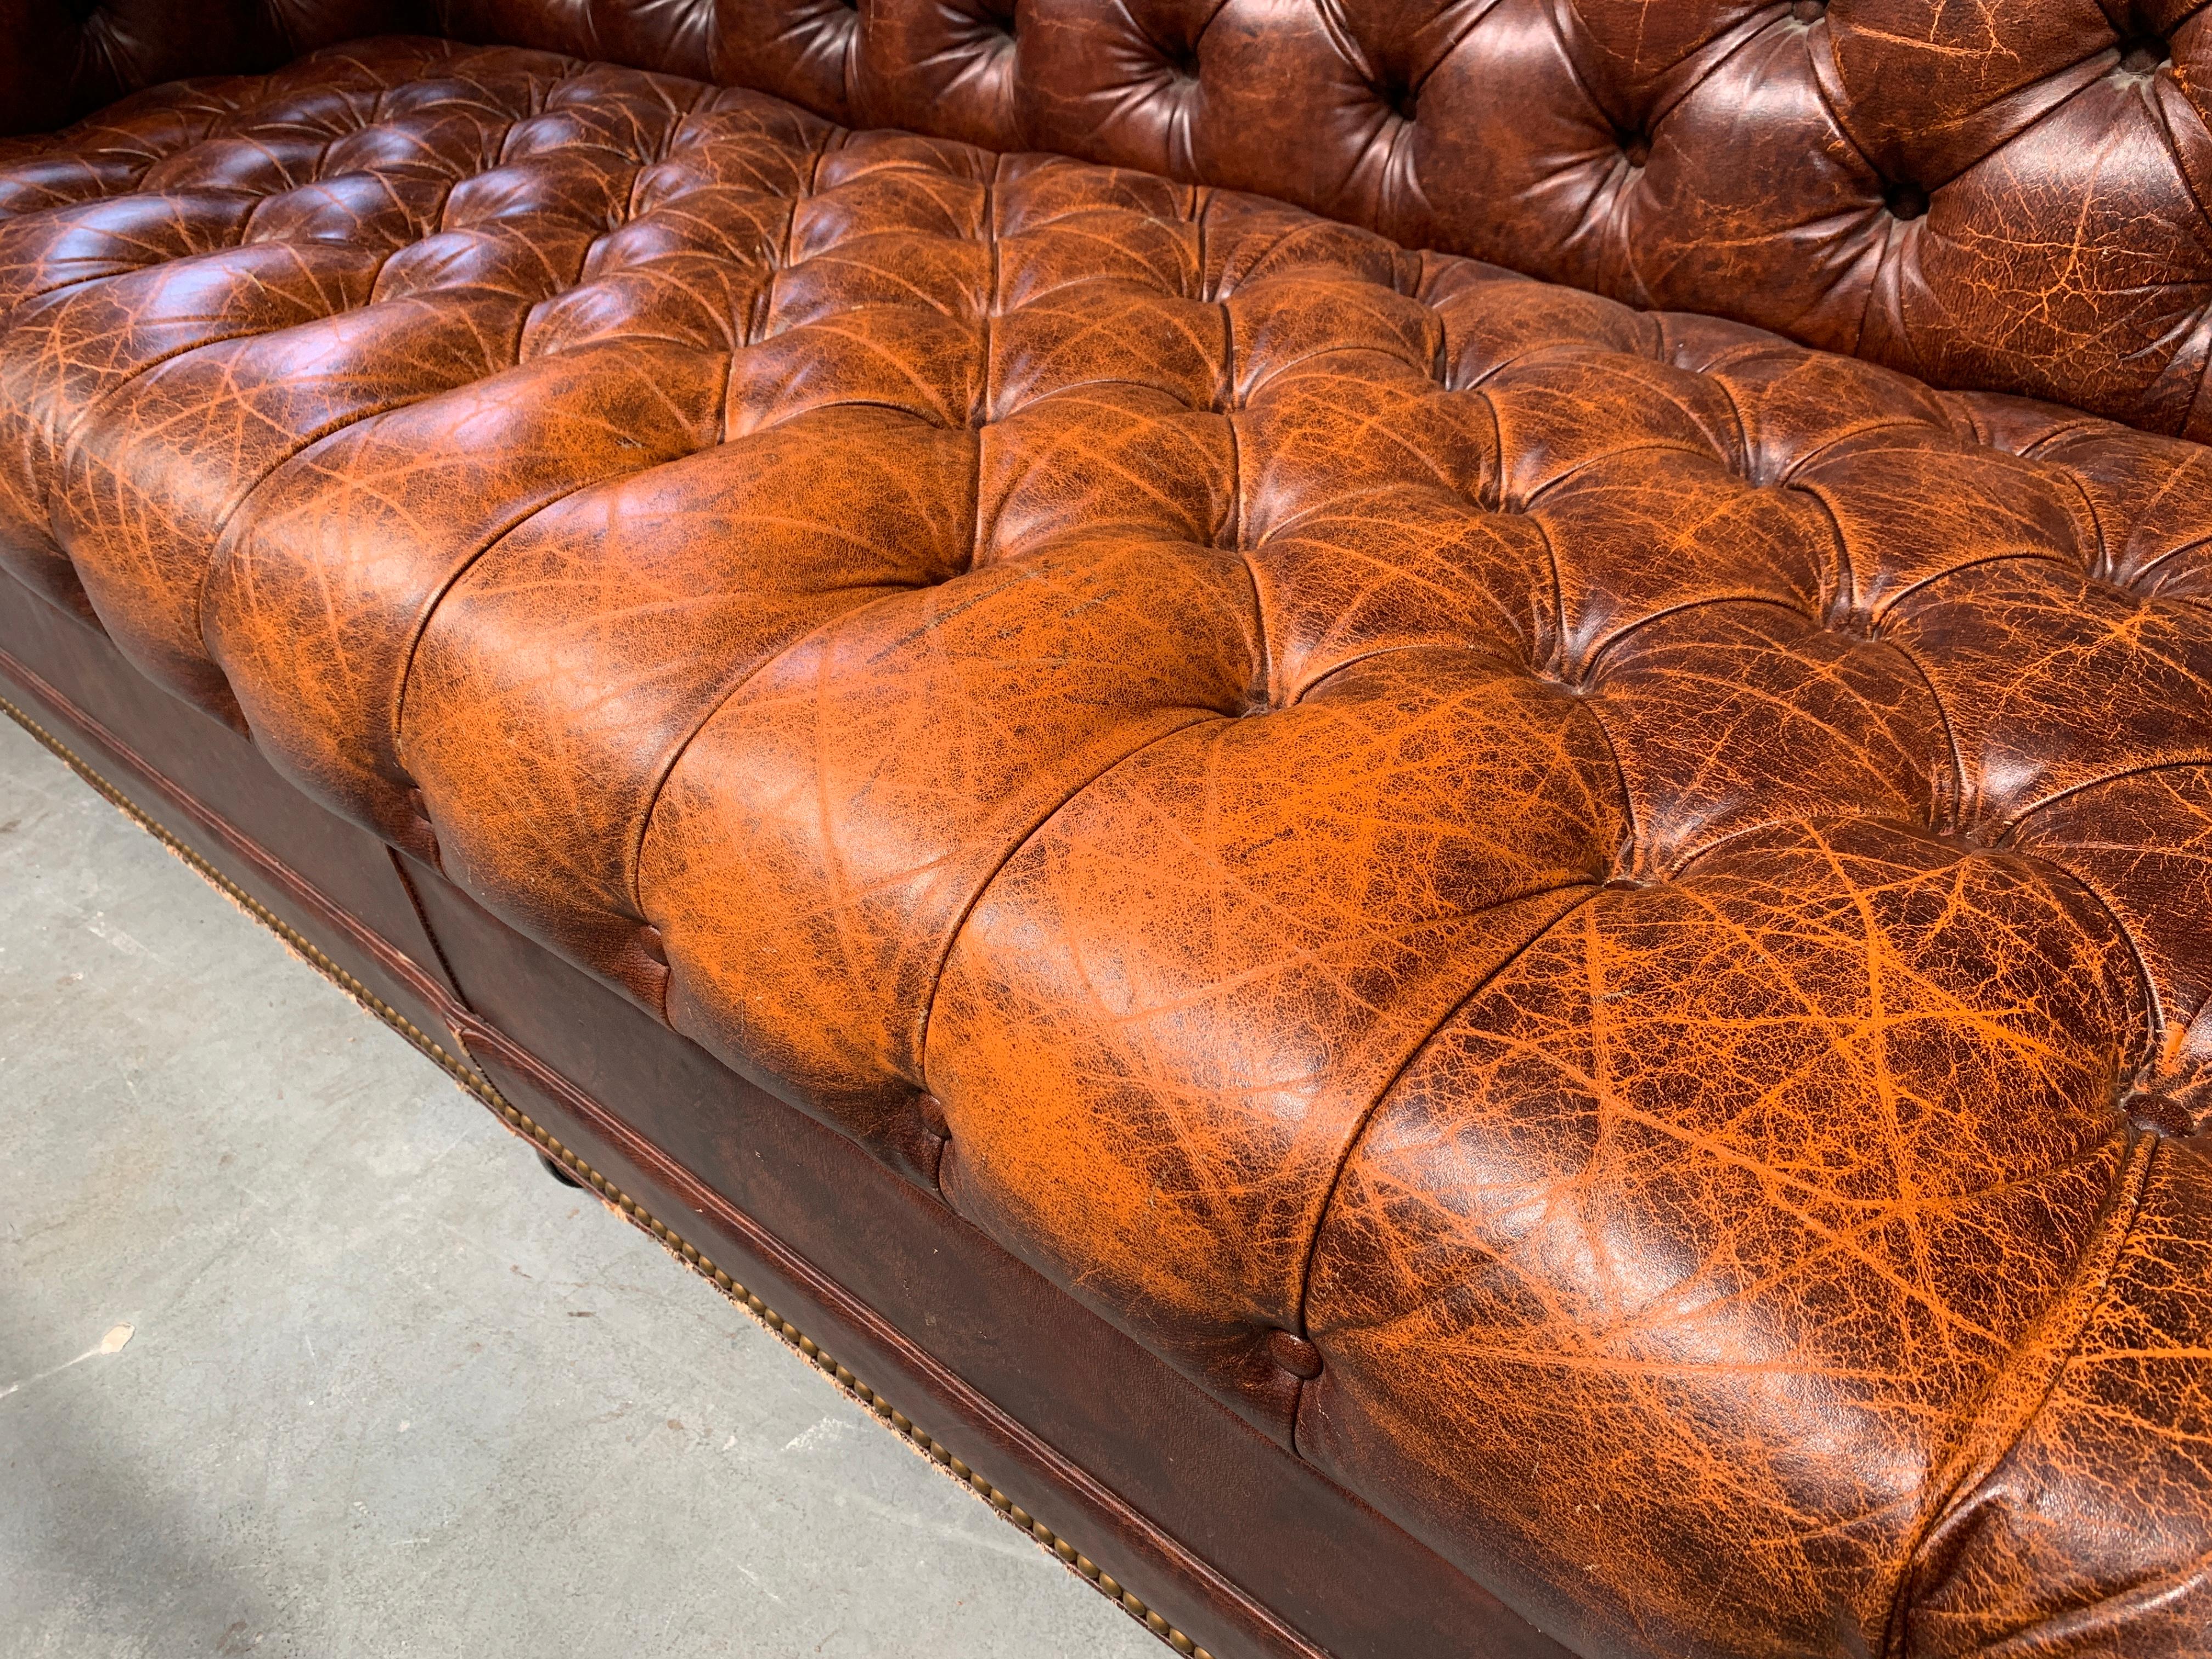 The Chesterfield is a classic design staple, with tufted leather upholstery and rolled arms - this piece is timeless. The leather on this piece is softly aged but in great condition, the front legs are casters so it is easy to move.